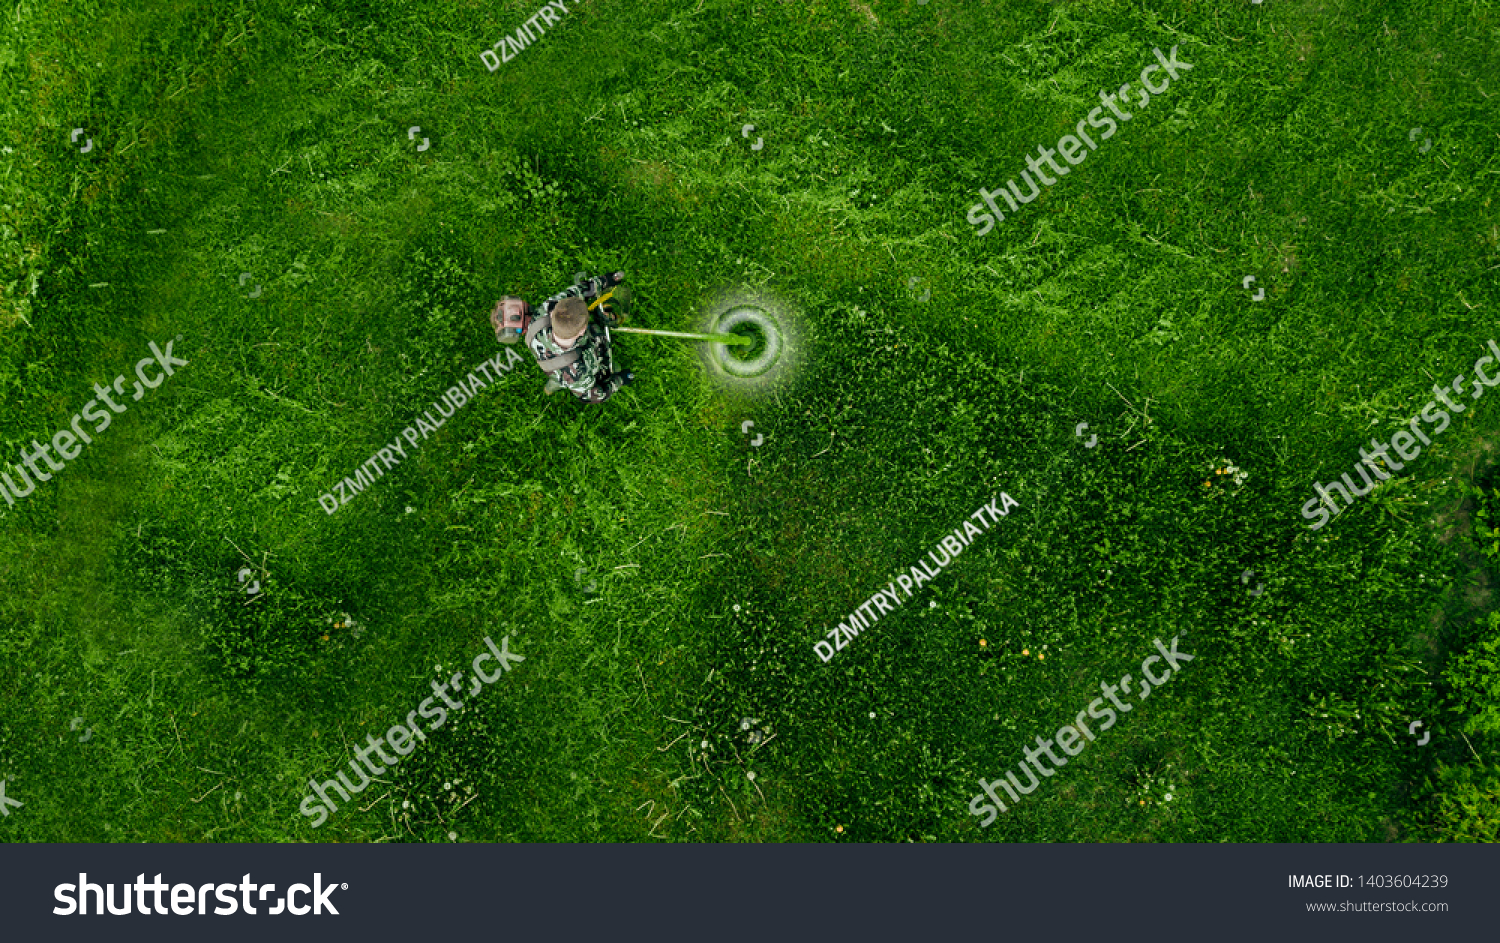 Top view man worker cutting grass with lawn mower.  #1403604239